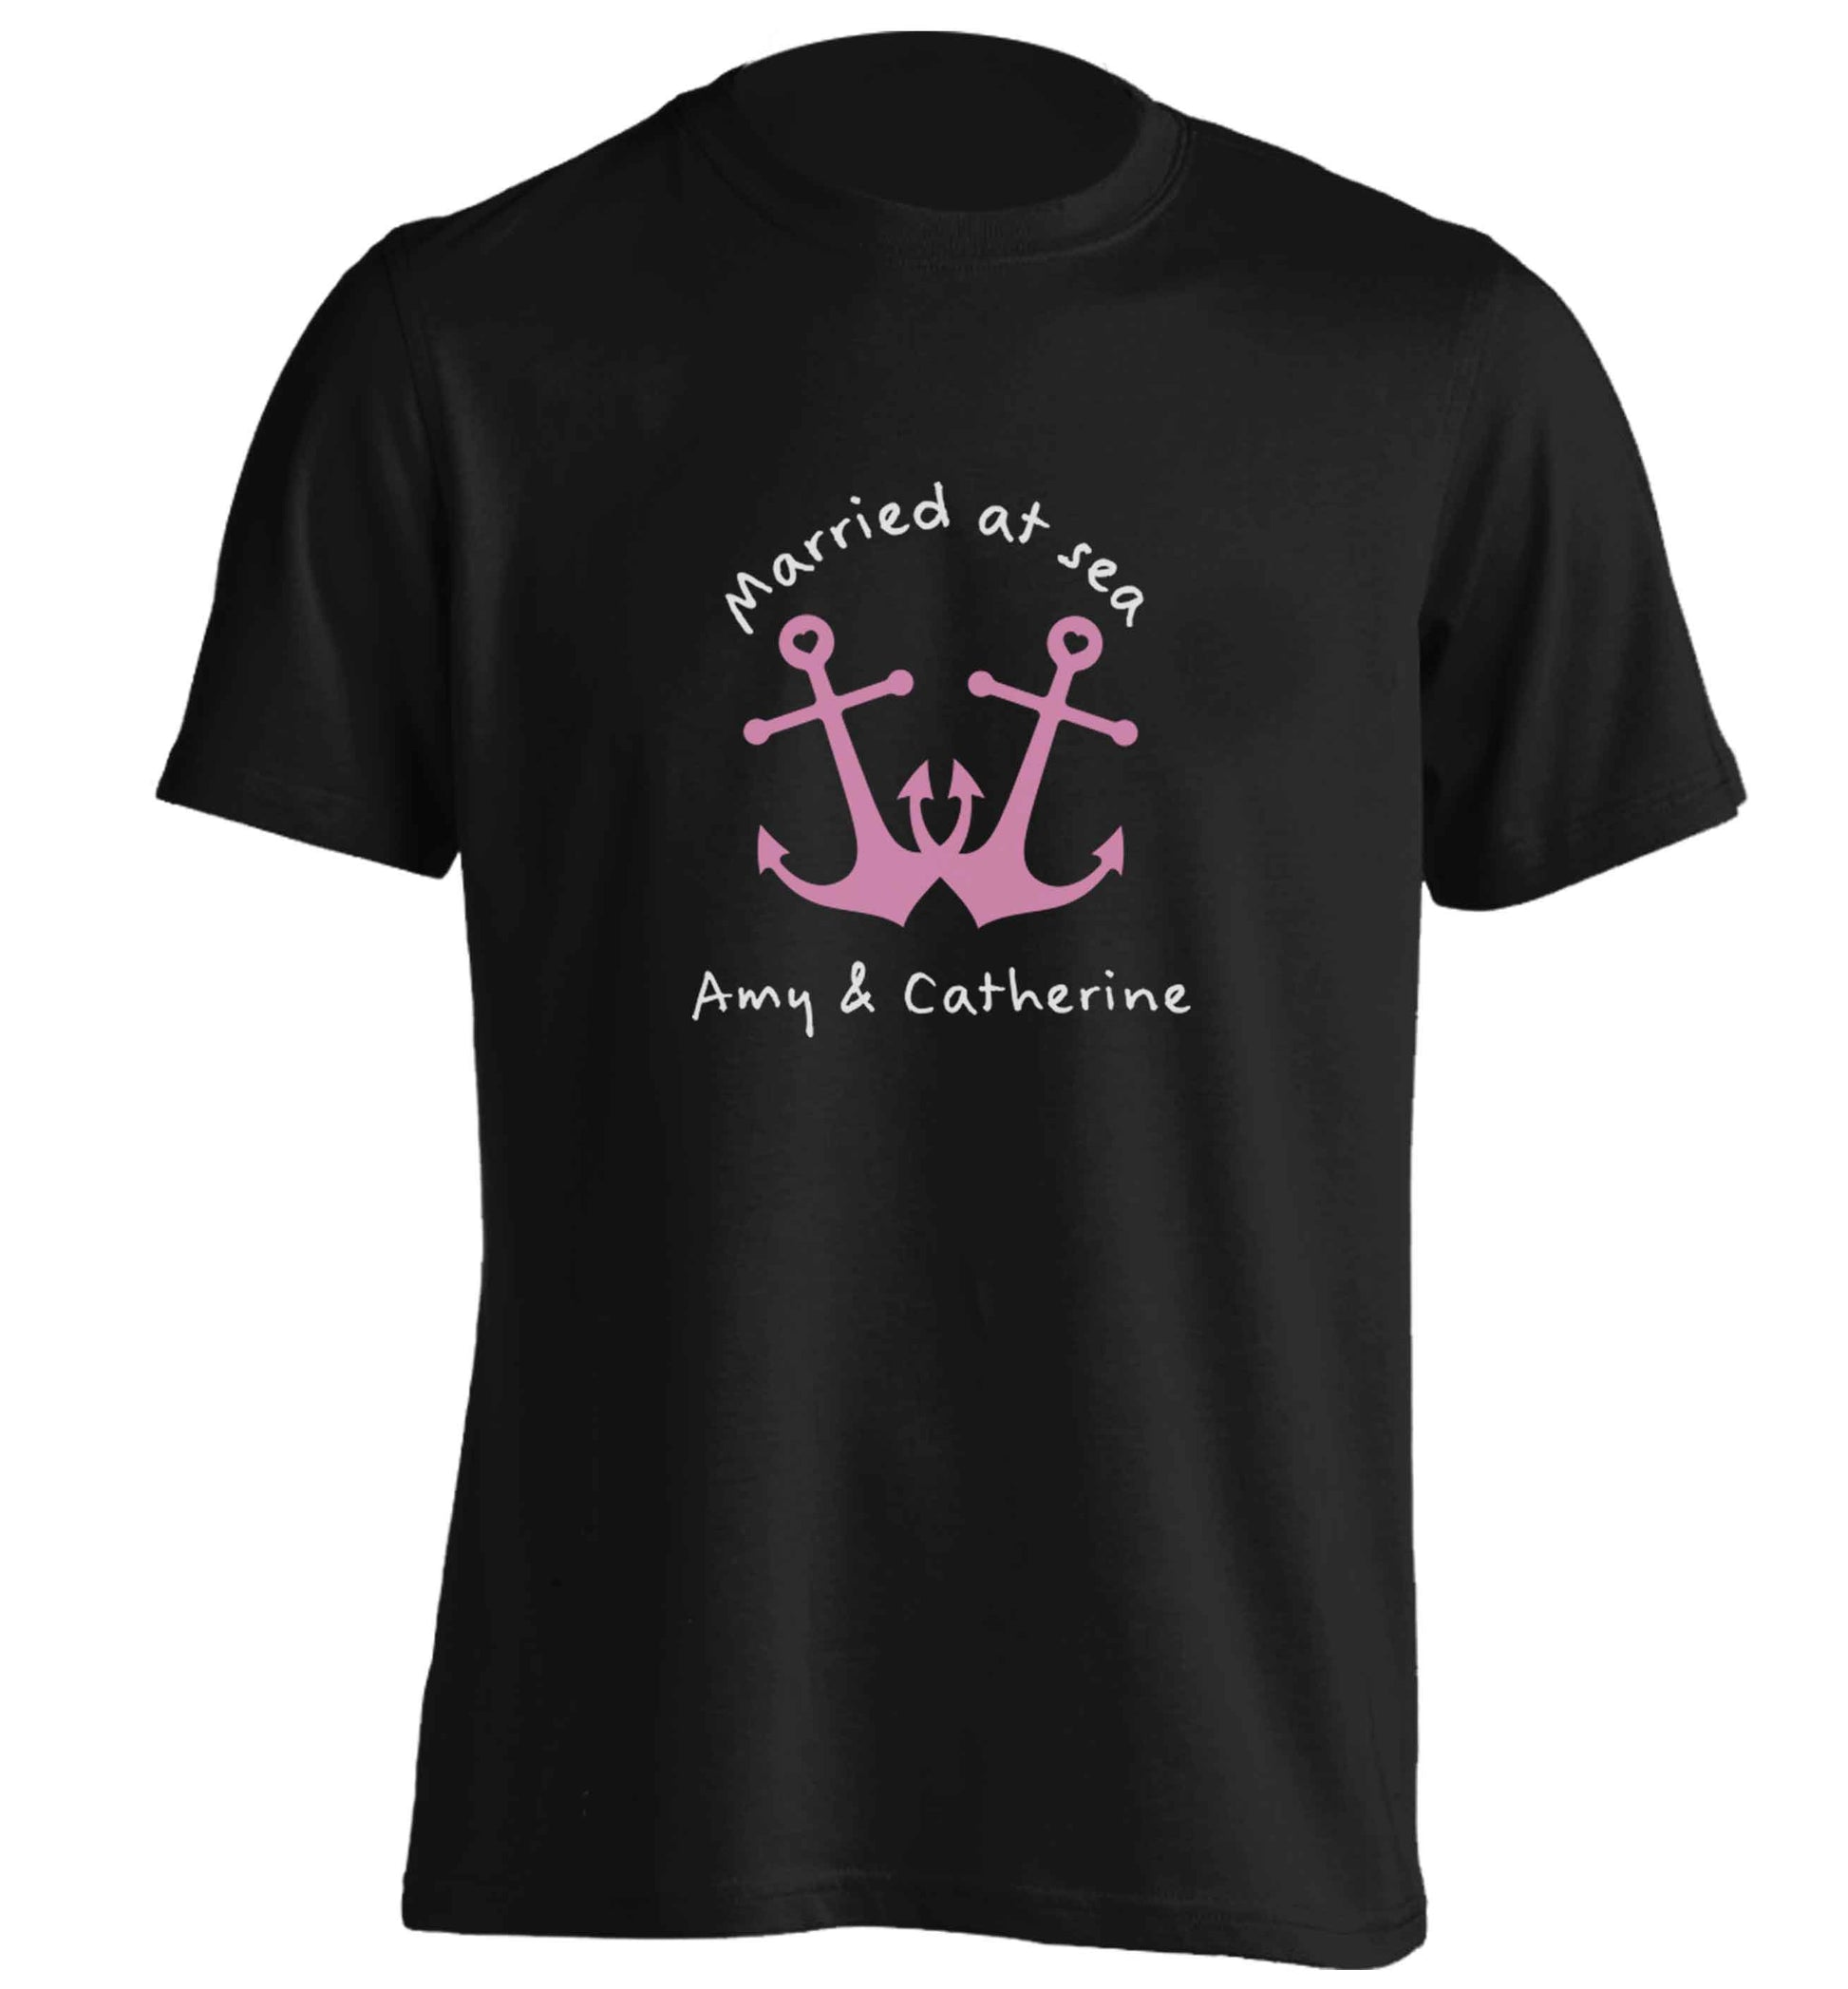 Married at sea pink anchors adults unisex black Tshirt 2XL